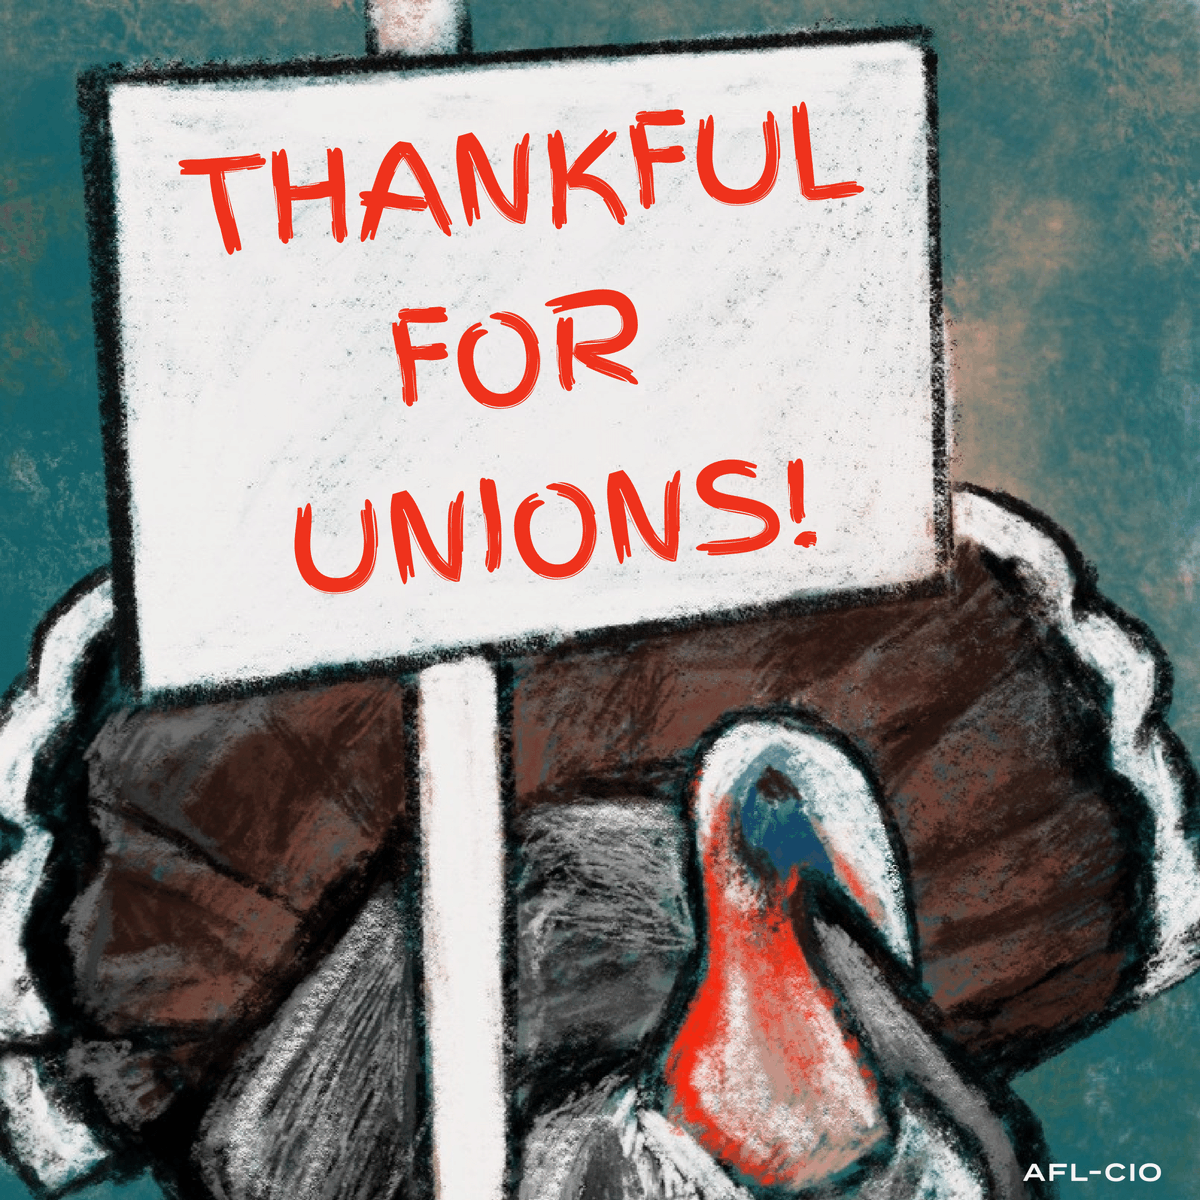 Happy Thanksgiving from the AFL-CIO! We're thankful each and every day for our unions & working families!